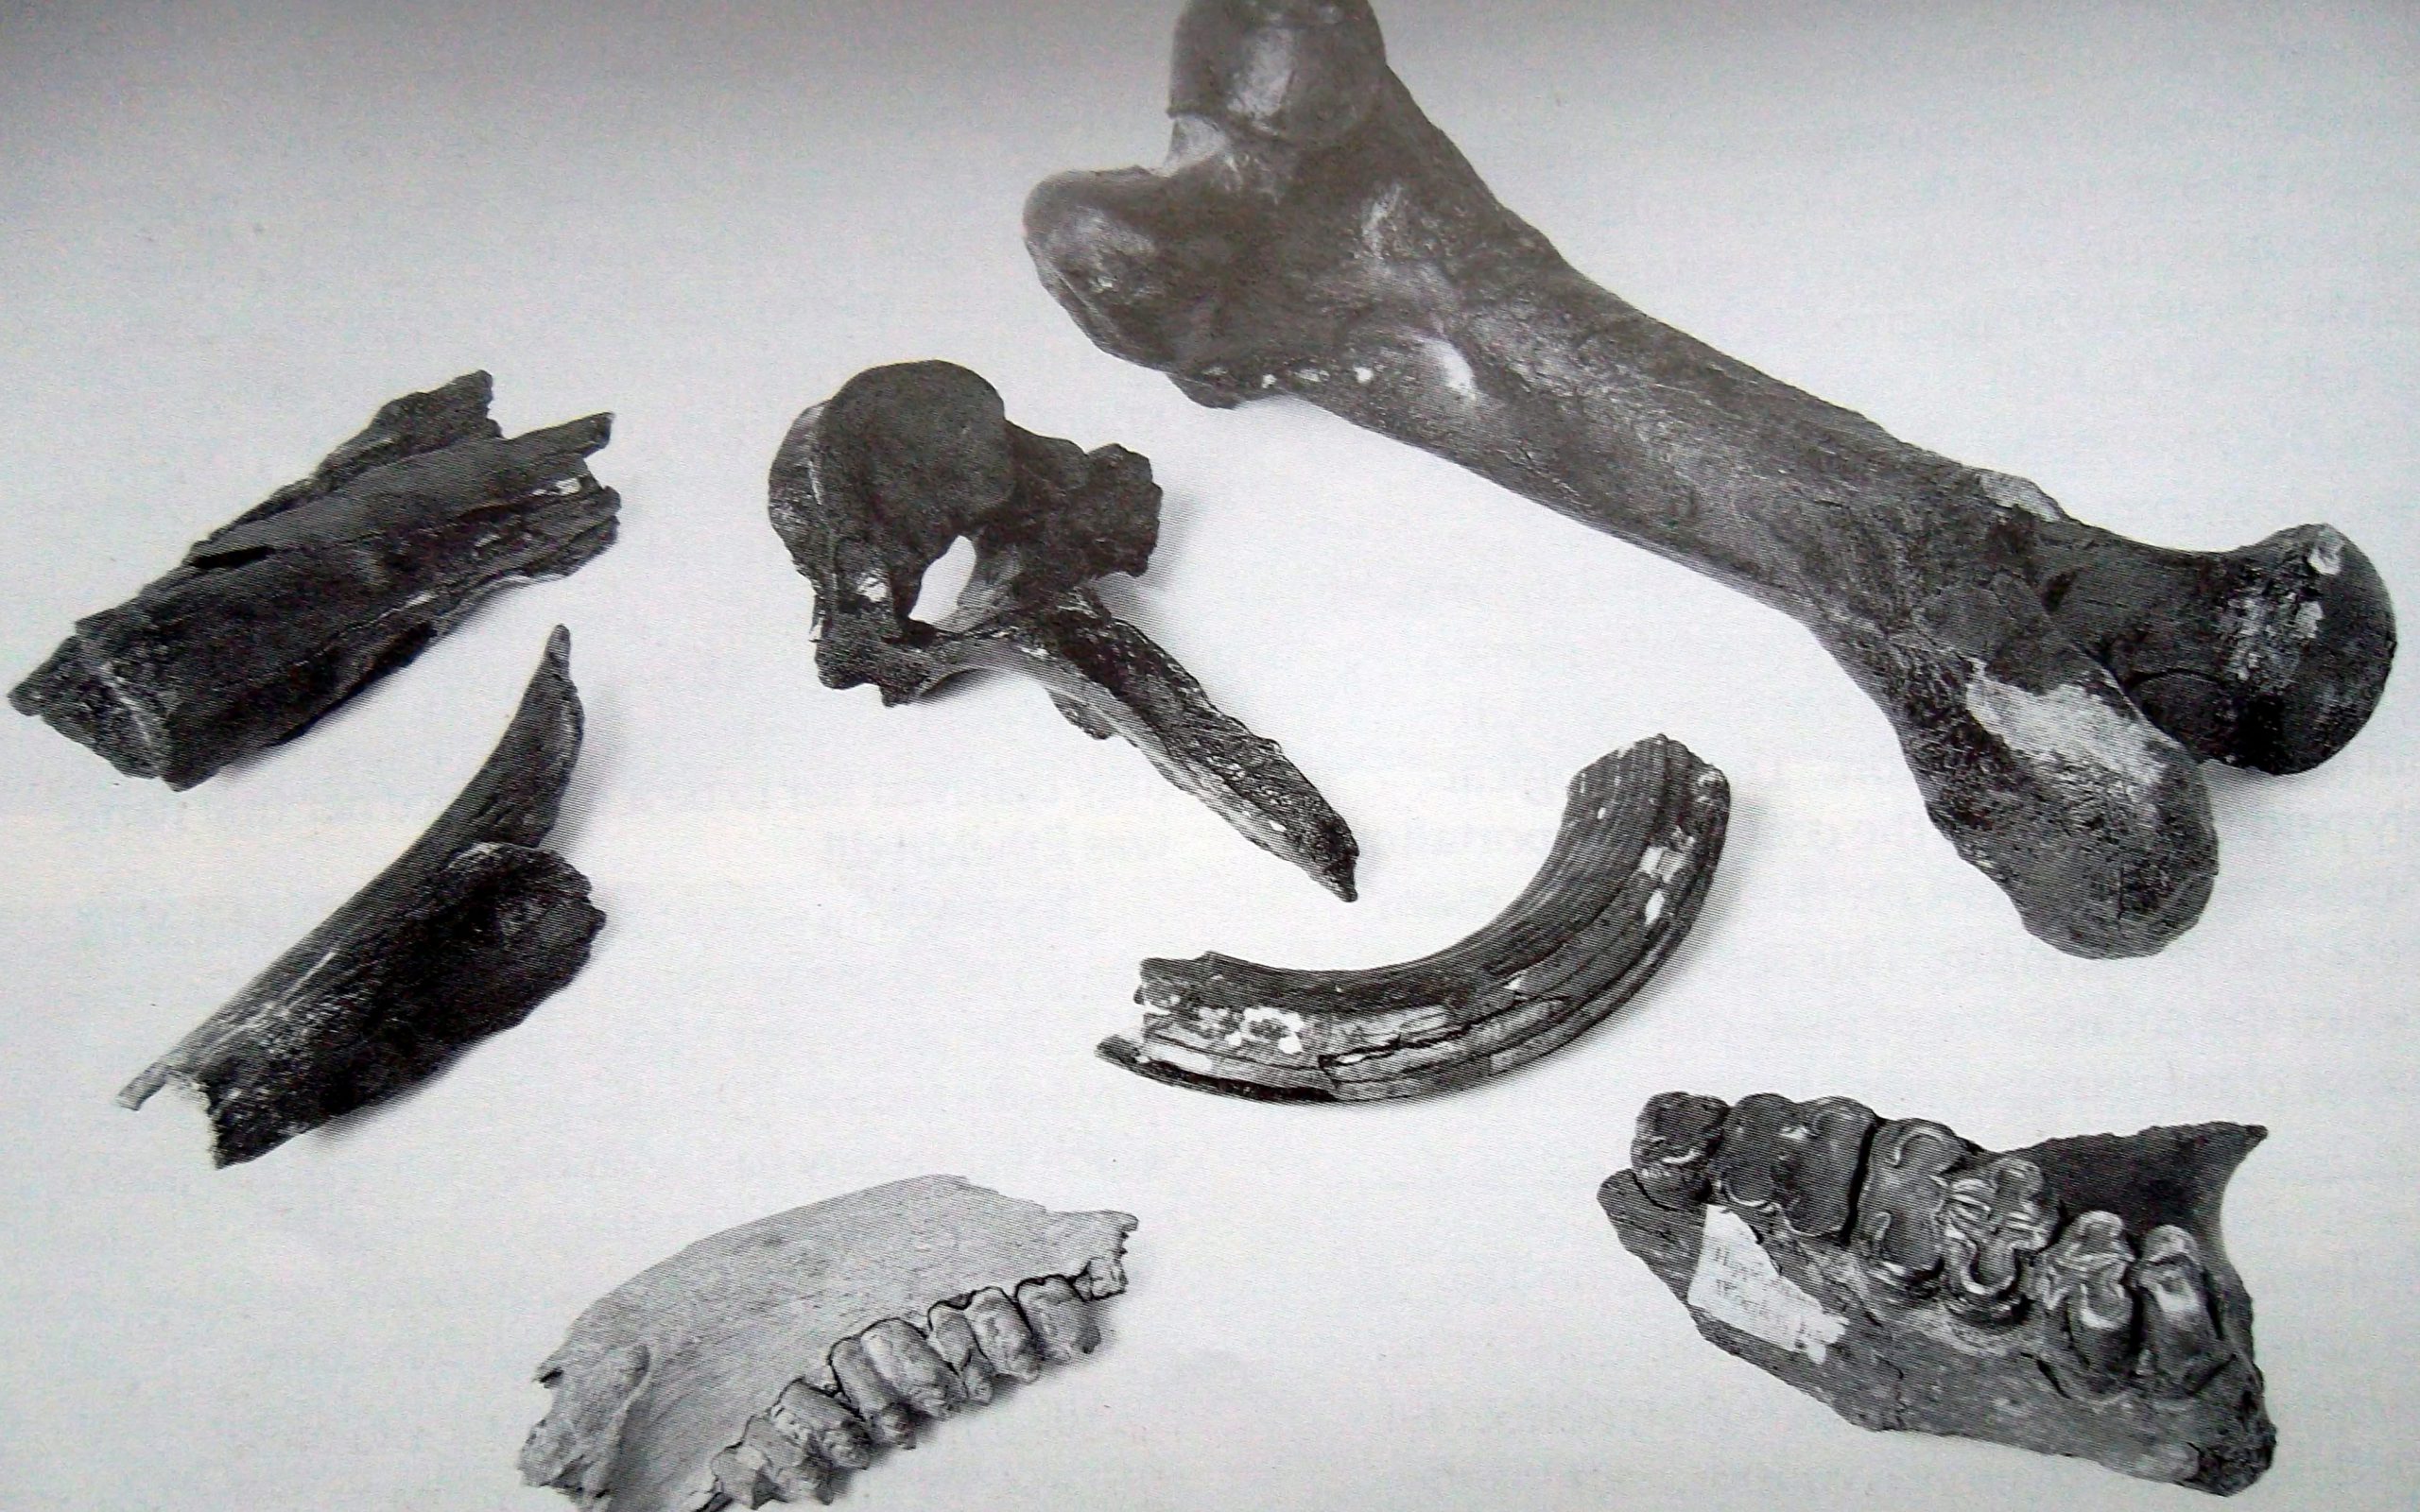 A picture of bones found in Armley in 1851, identified as hippopotamus and elephant bones.